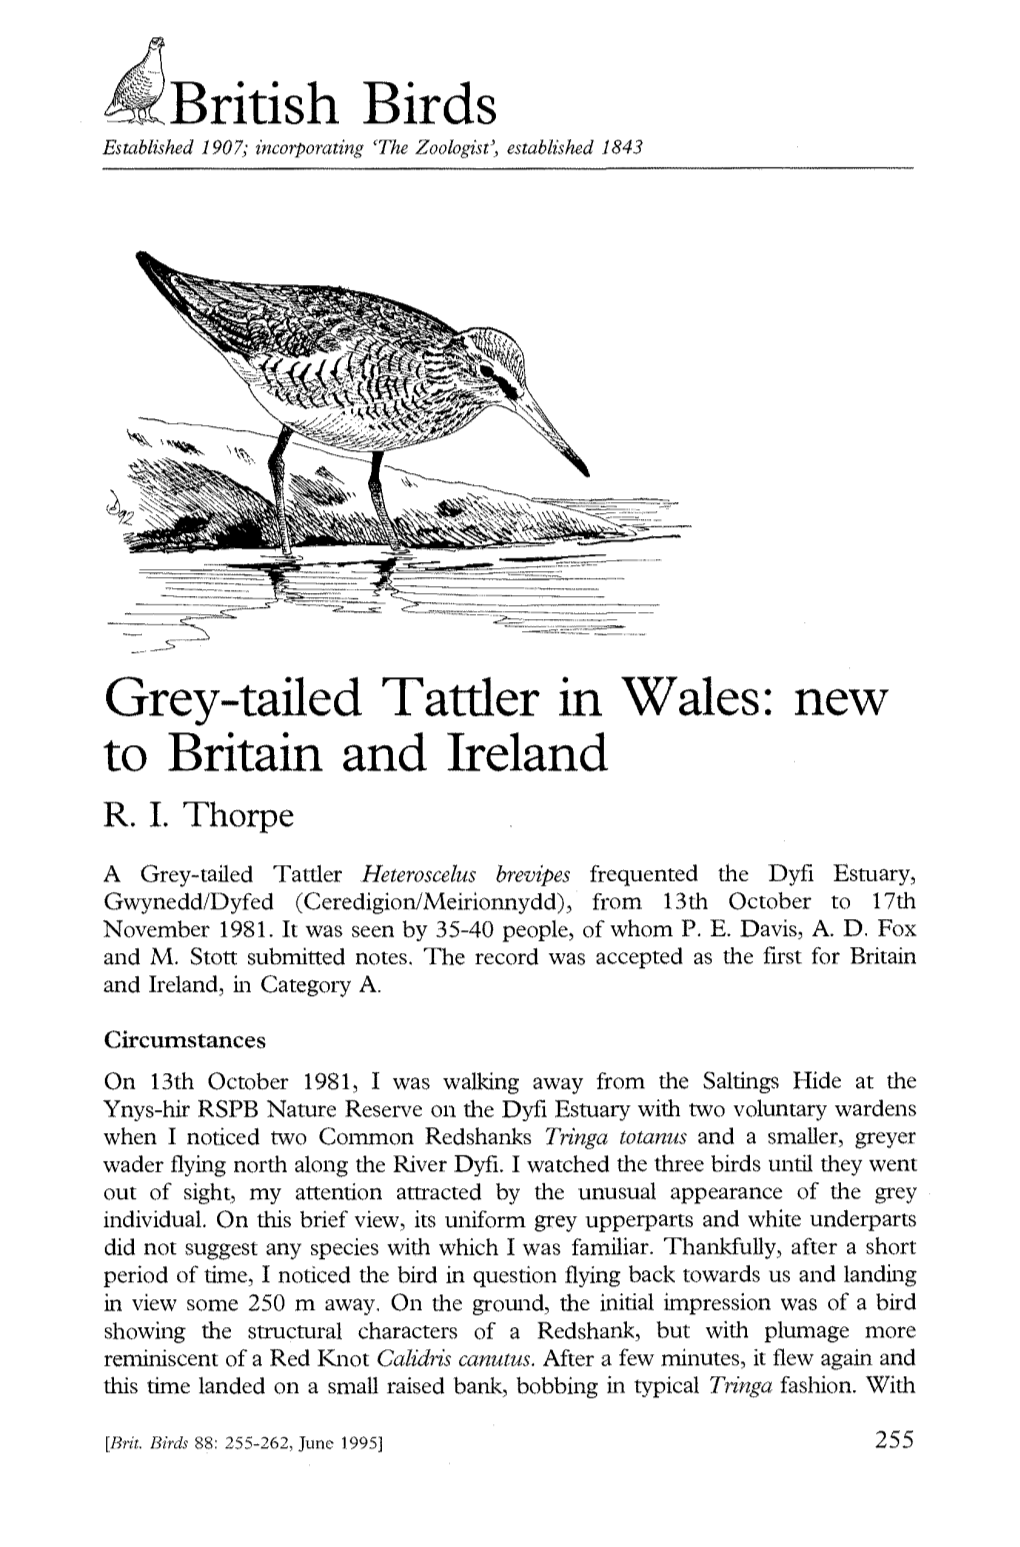 British Birds Grey-Tailed Tattler in Wales: New to Britain and Ireland